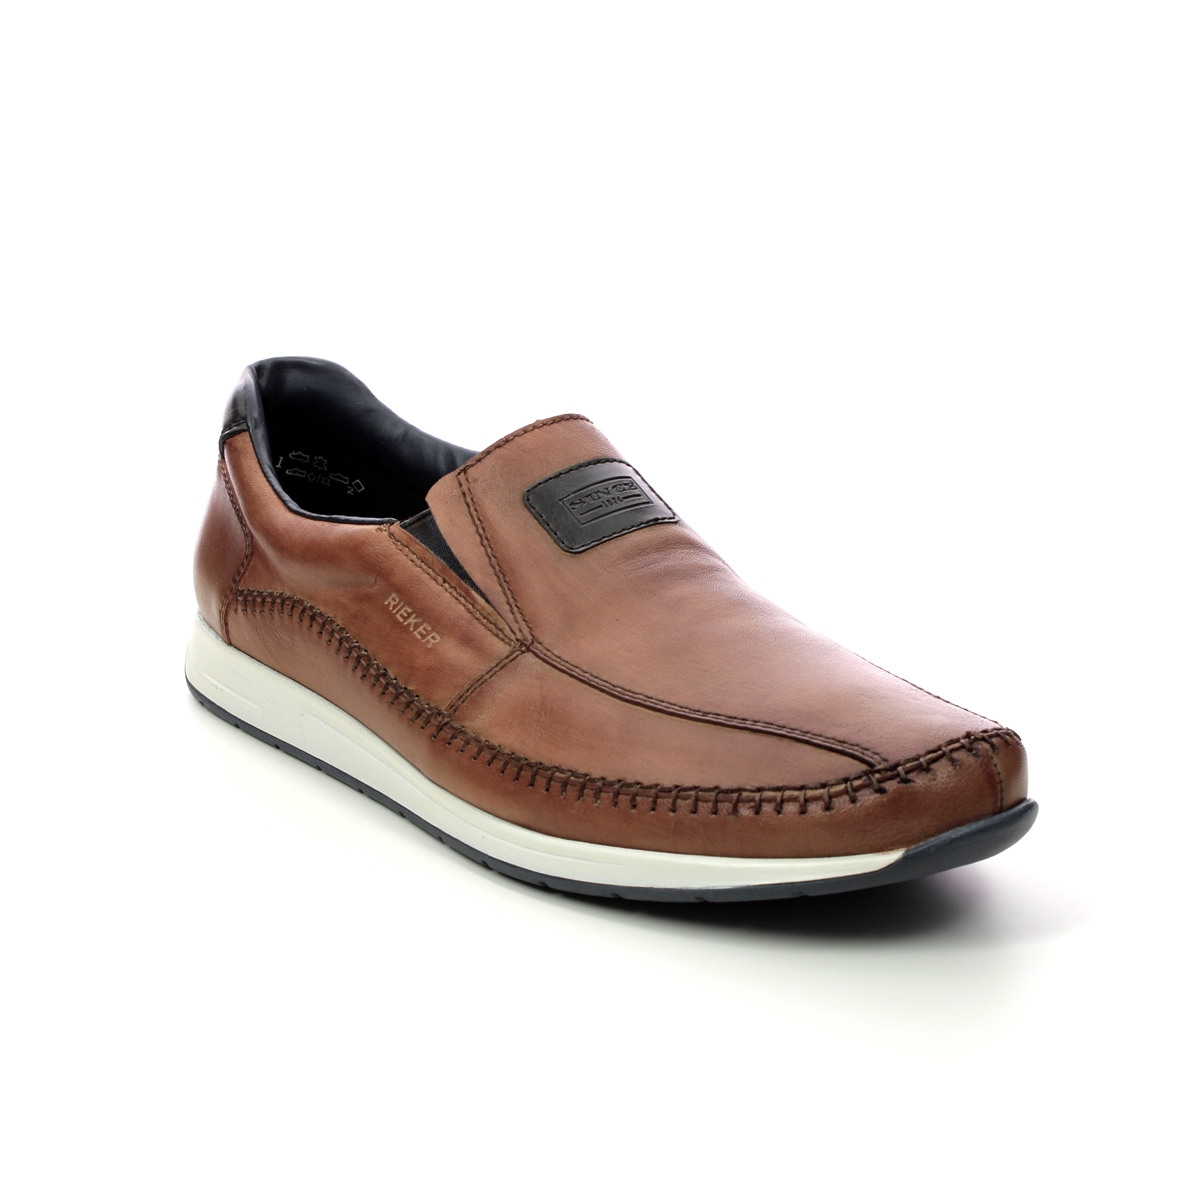 Rieker Slowslip Tan Leather Mens Slip-On Shoes 11962-25 In Size 43 In Plain Tan Leather